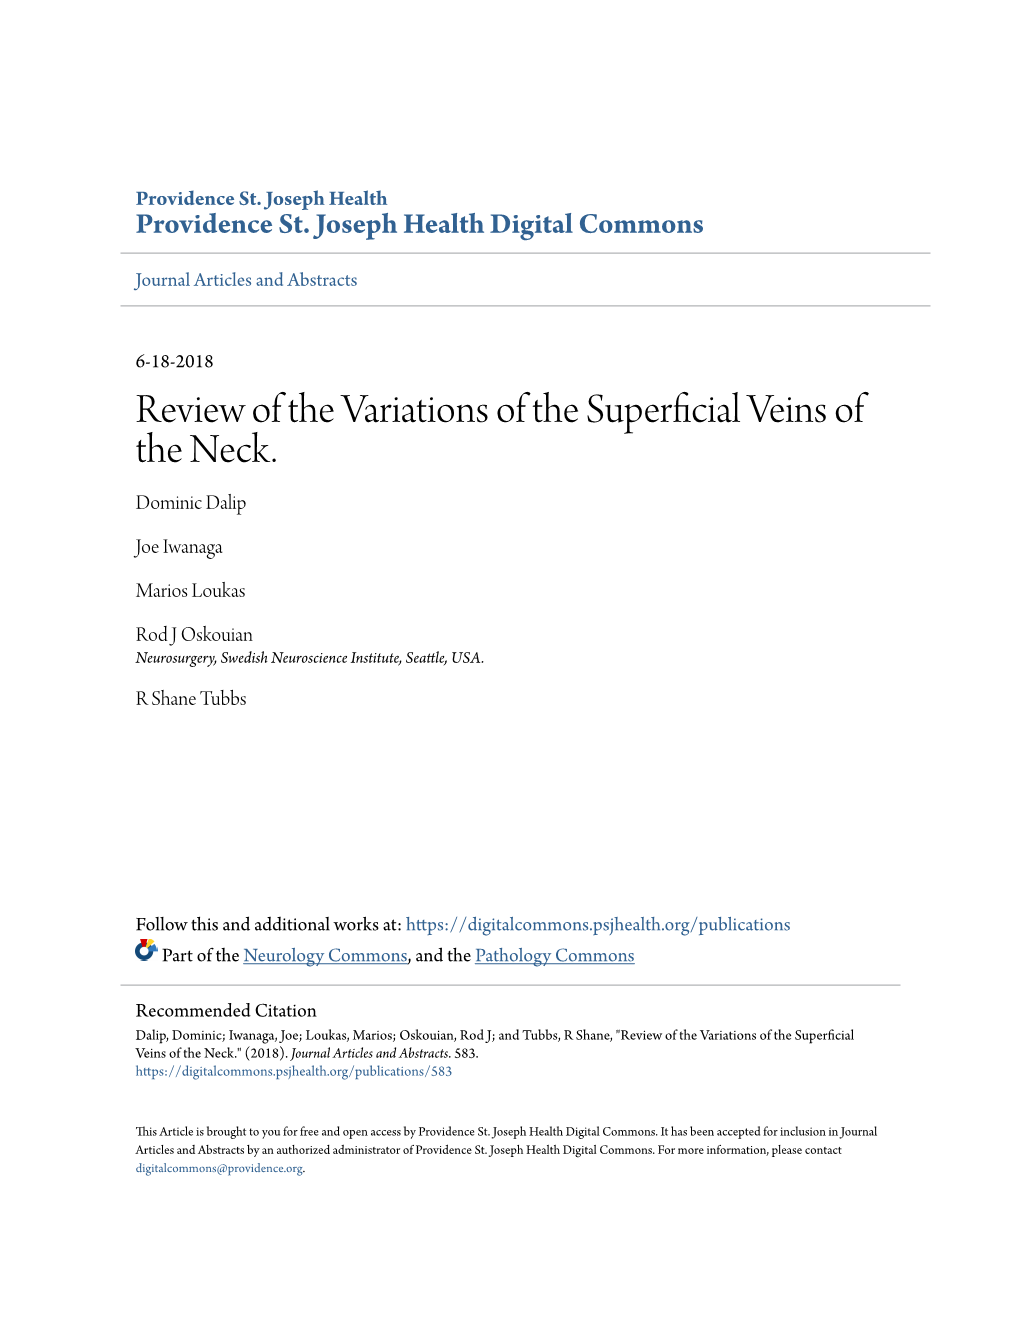 Review of the Variations of the Superficial Veins of the Neck. Dominic Dalip